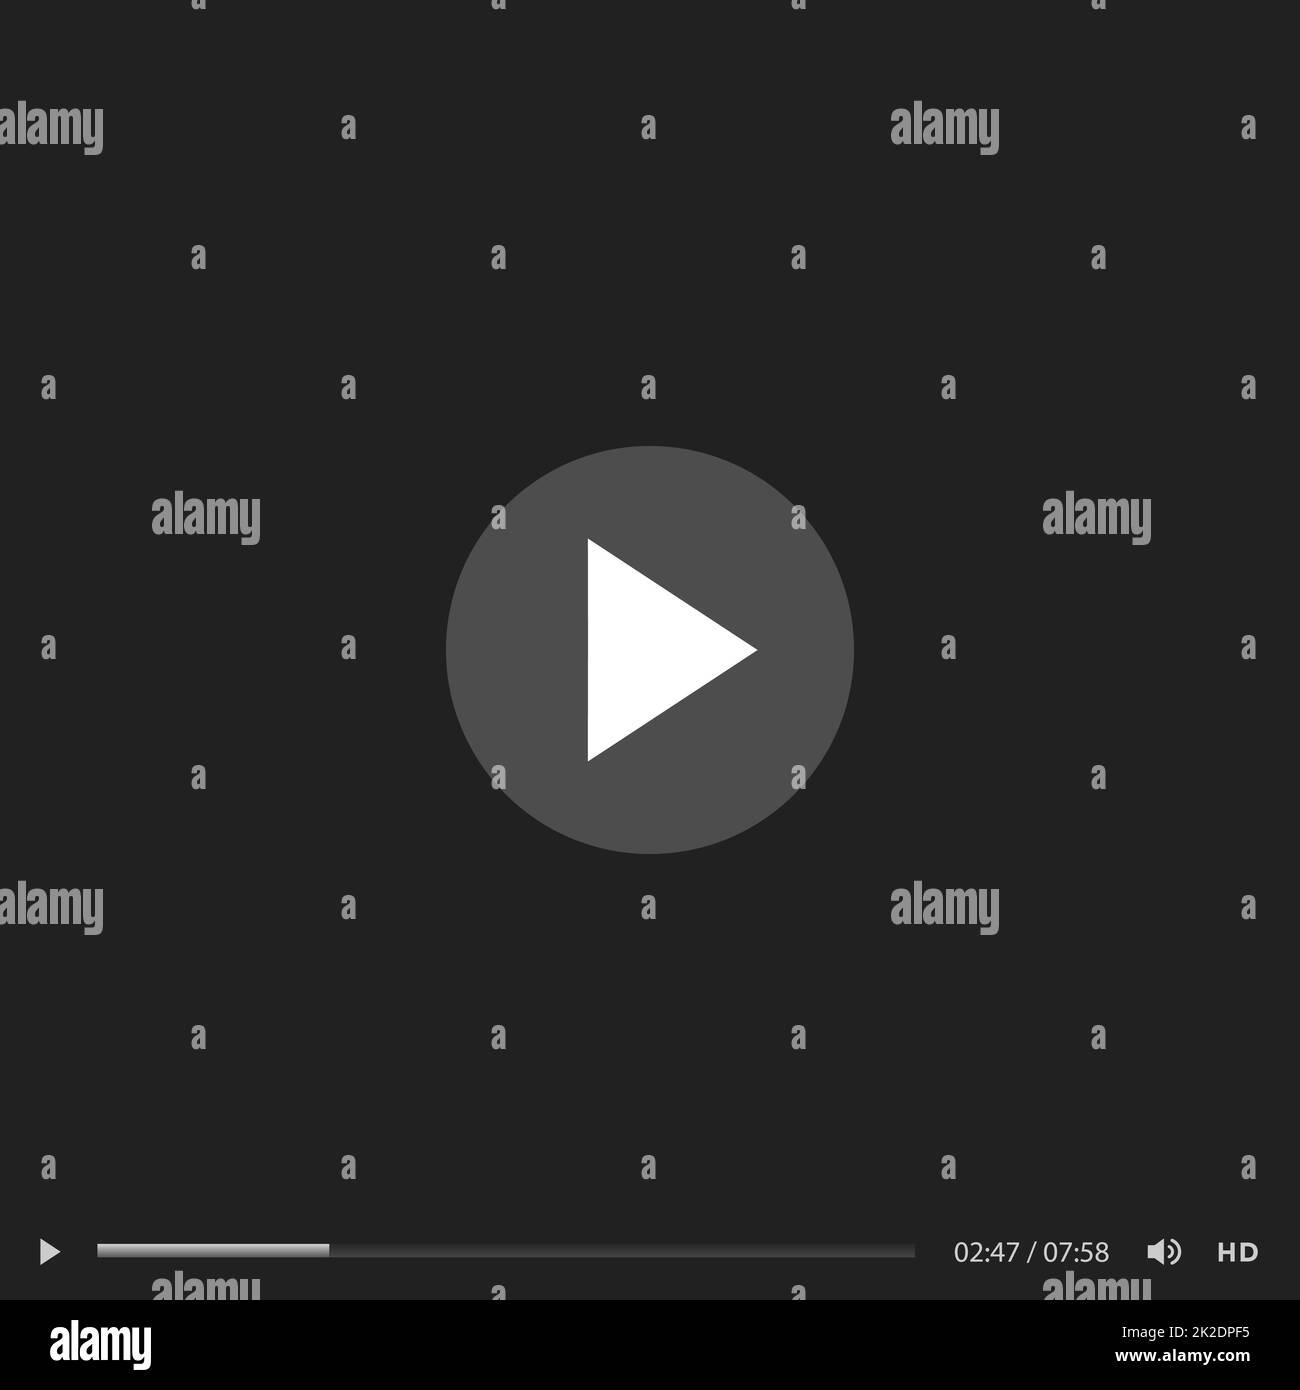 Video and Media Player Interface Template - Vector Stock Photo